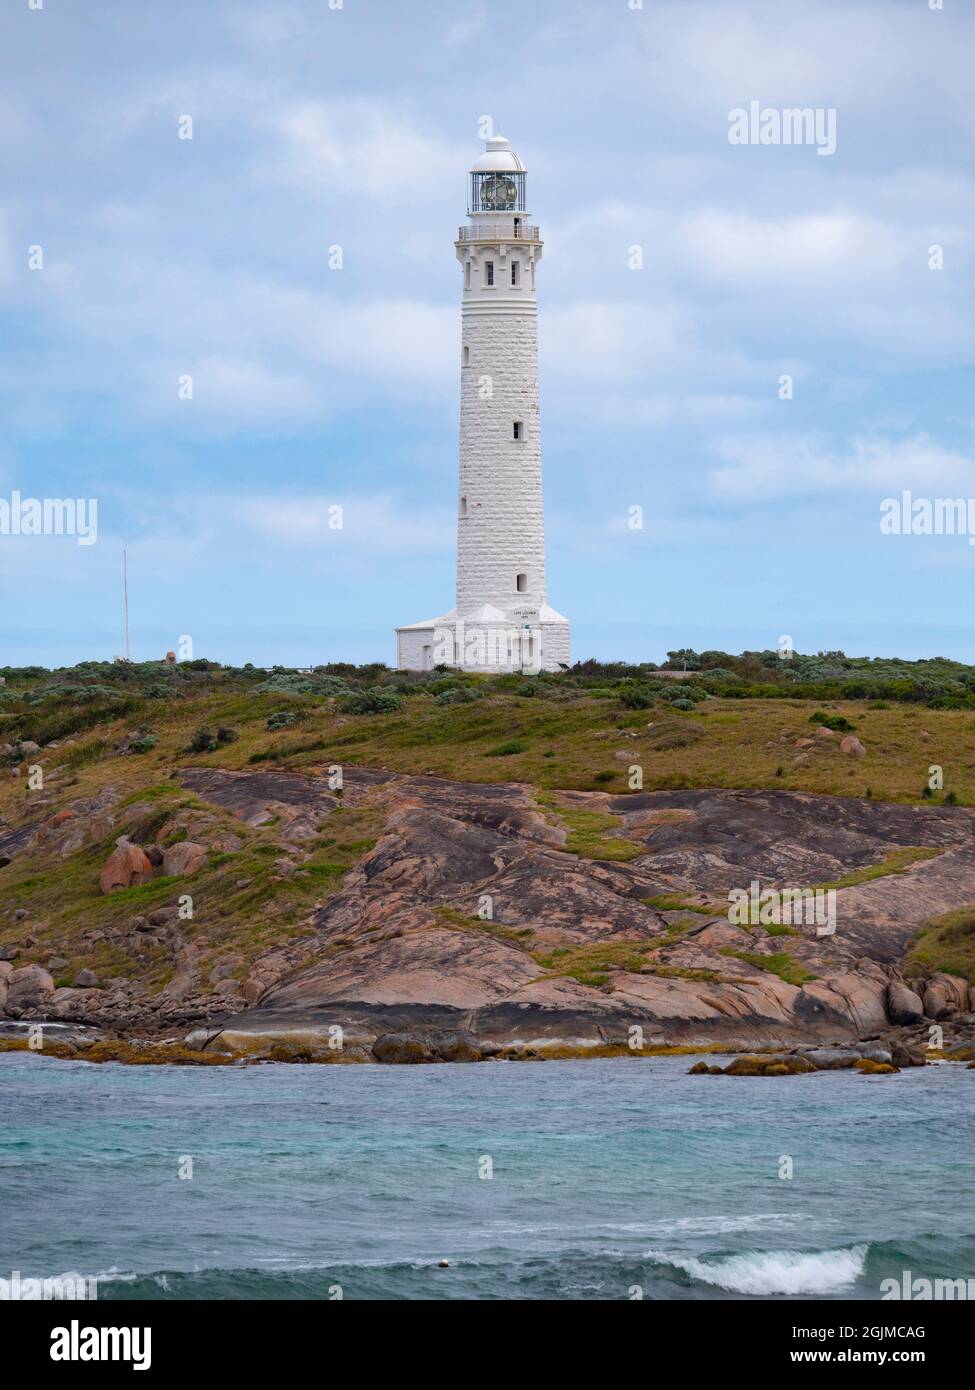 Cape Leeuwin Lighthouse viewed across water was built in 1895. Stock Photo